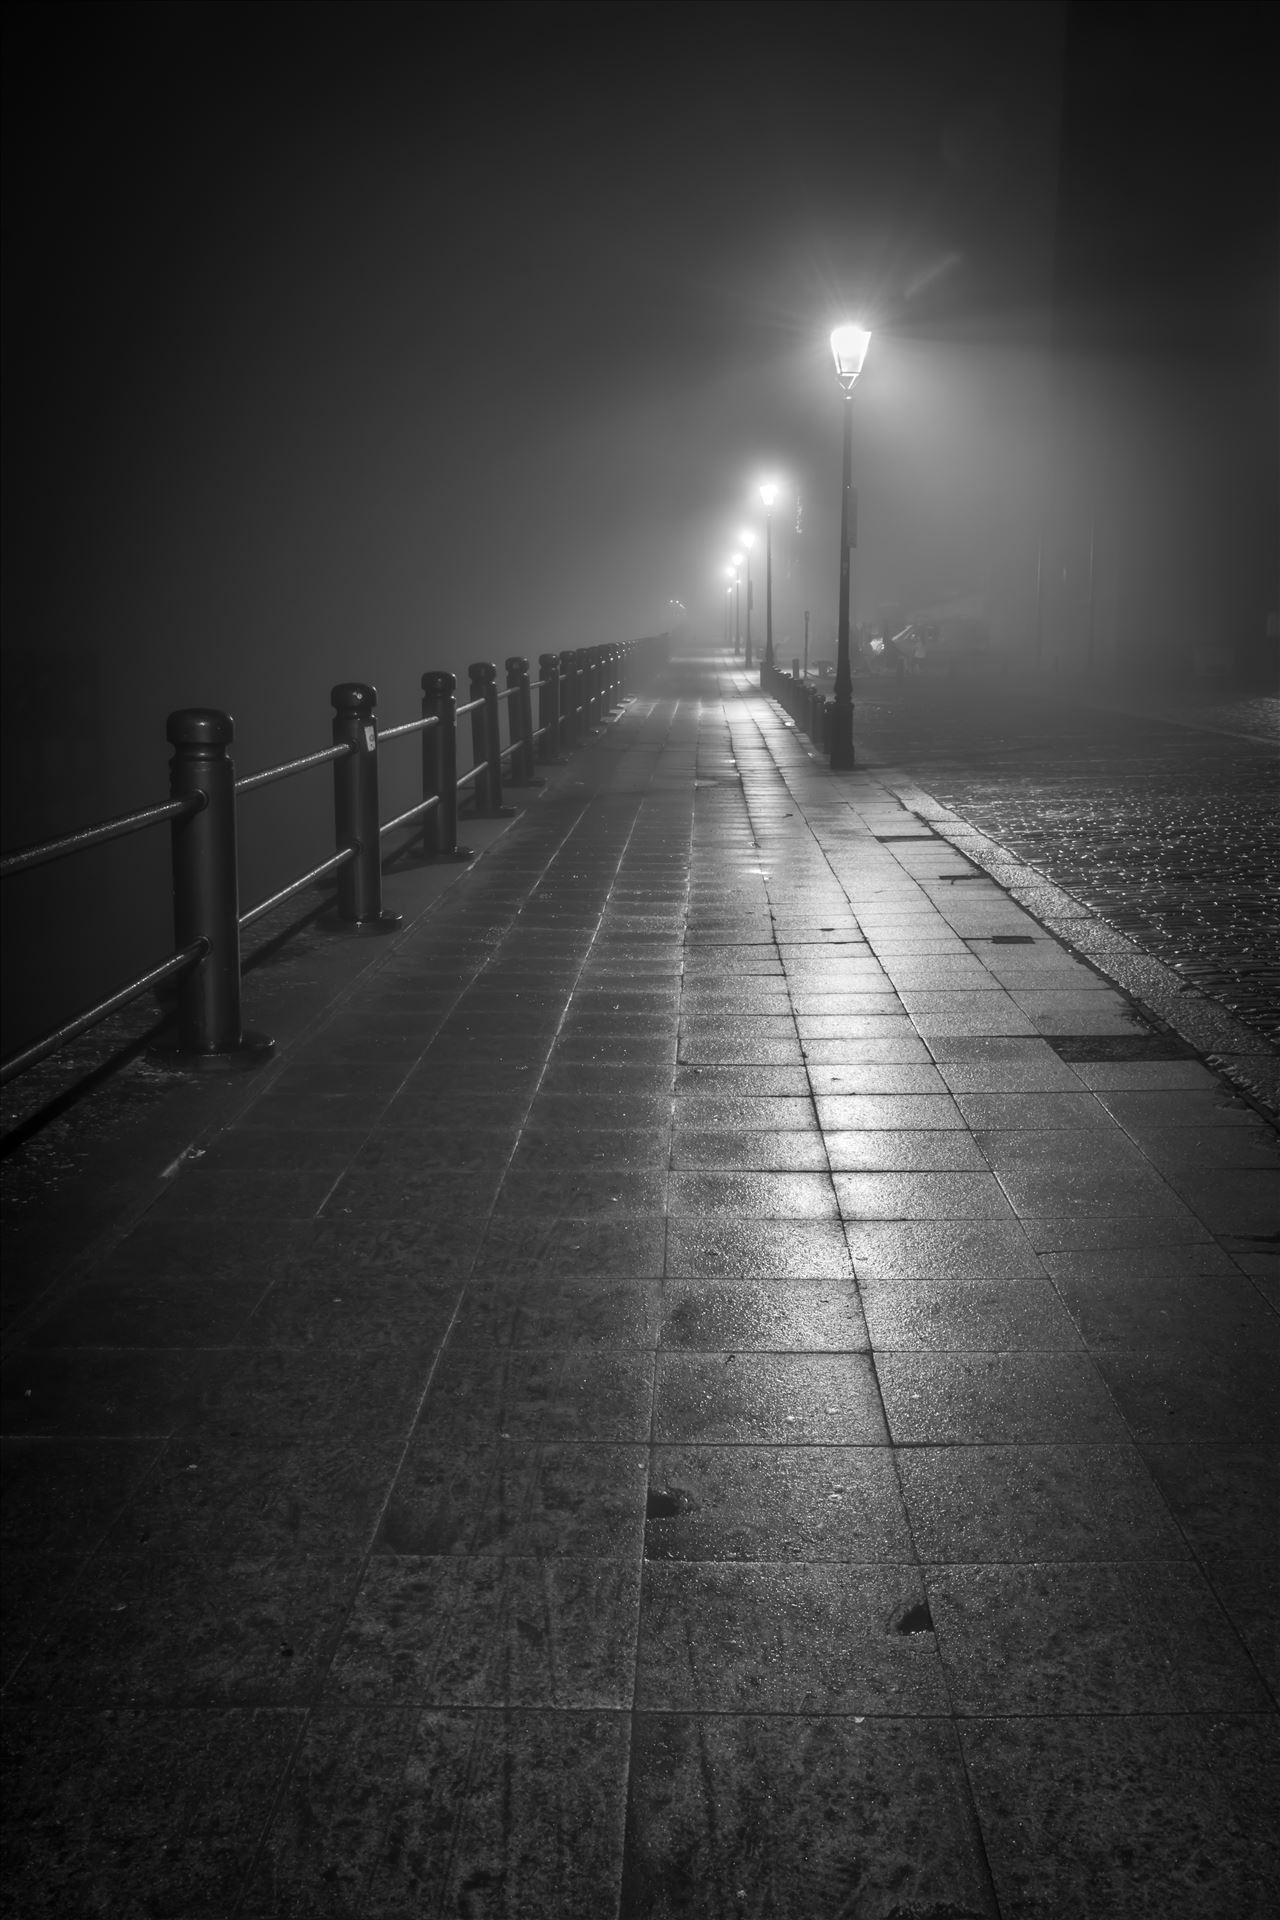 Fog on the Tyne 1 Shot on the quayside at Newcastle early one foggy morning by philreay